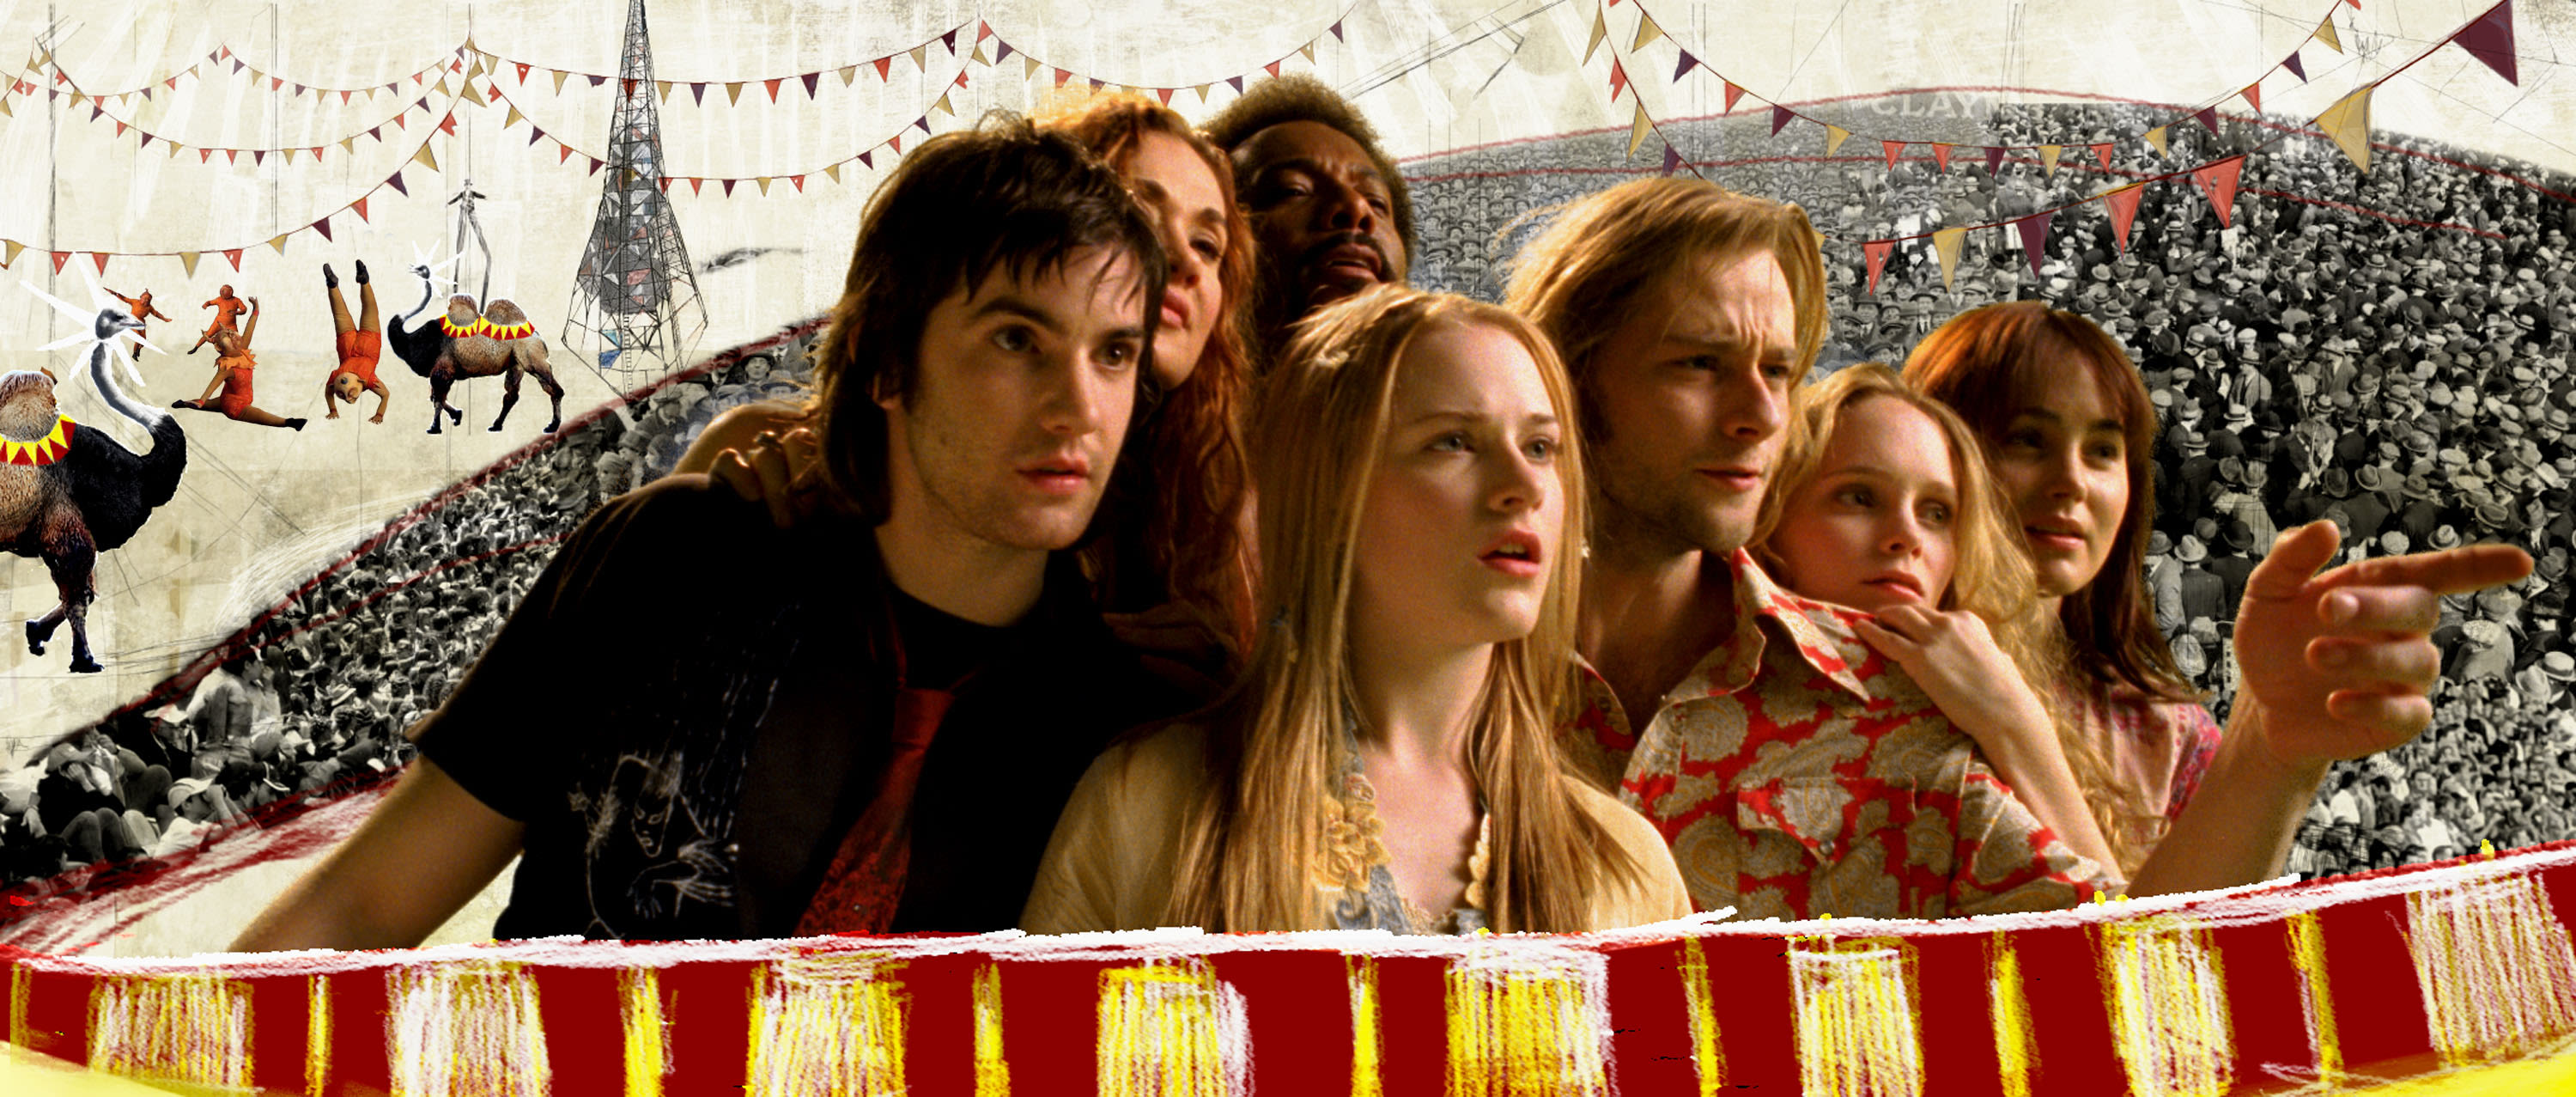 Evan Rachel Wood Was ‘Actually Tripping’ During ‘I Am the Walrus’ Scene in ‘Across the Universe’